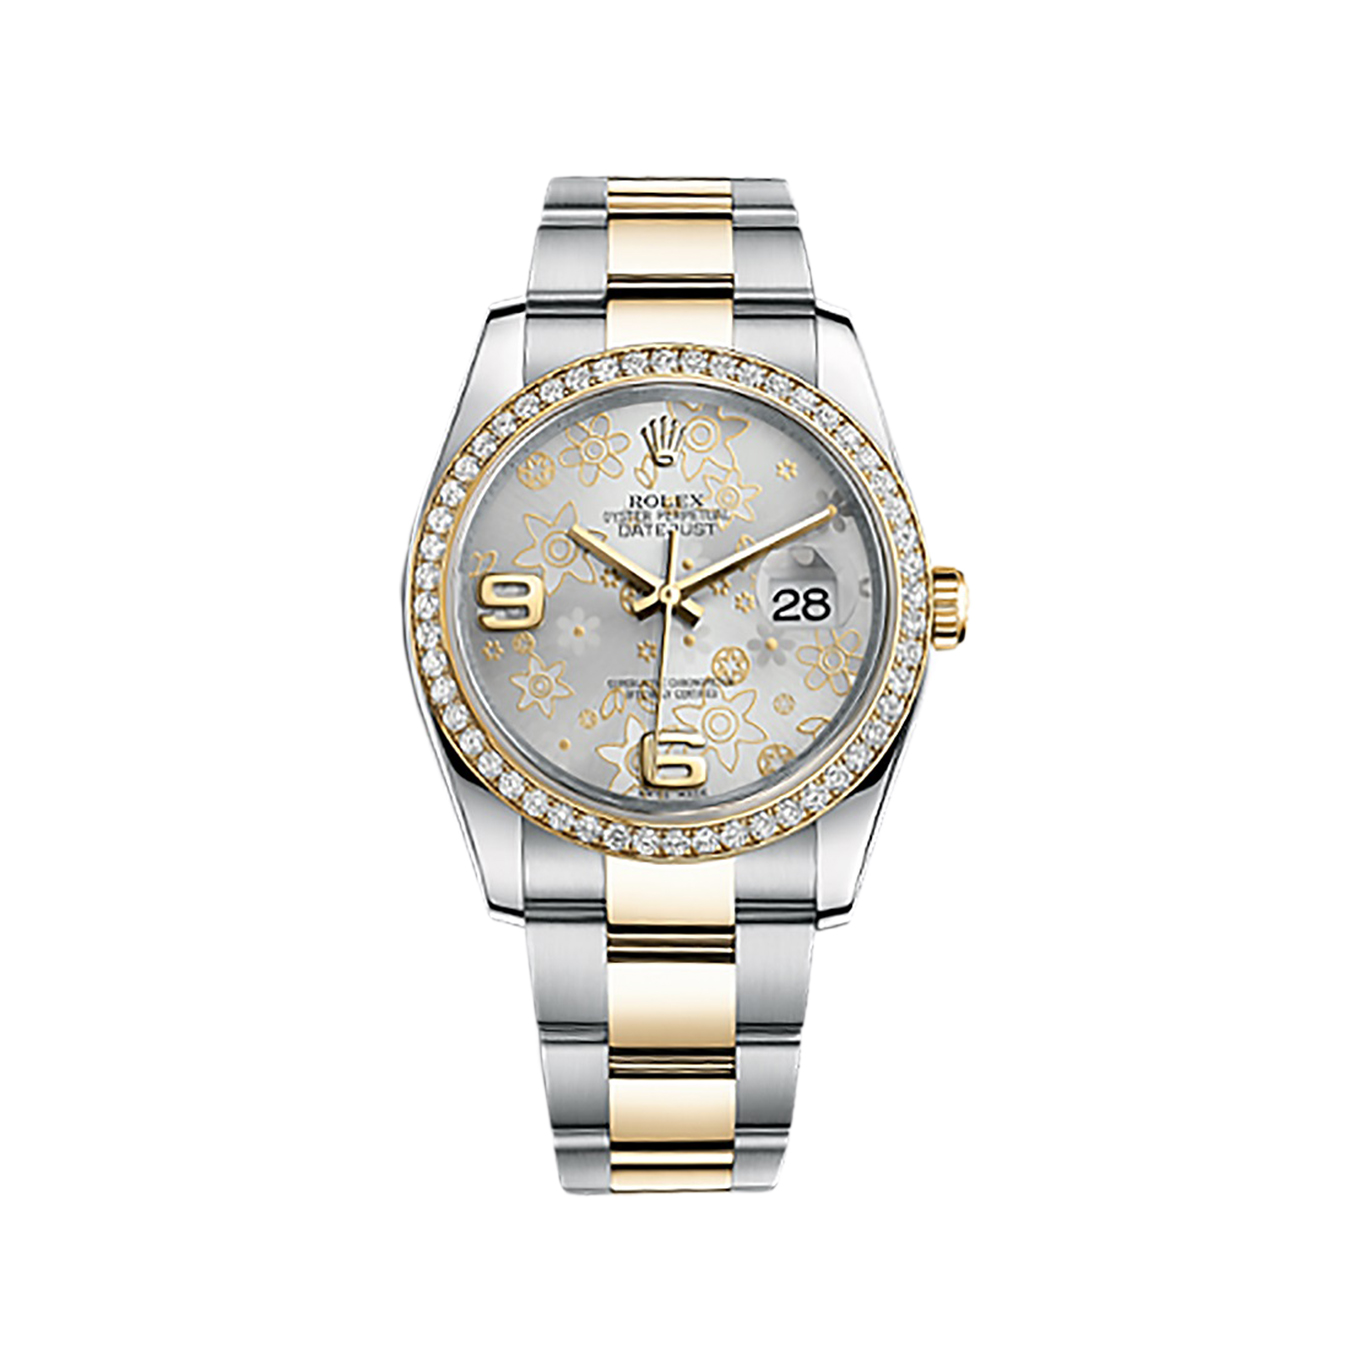 Datejust 36 116243 Gold & Stainless Steel Watch (Silver Floral Motif)